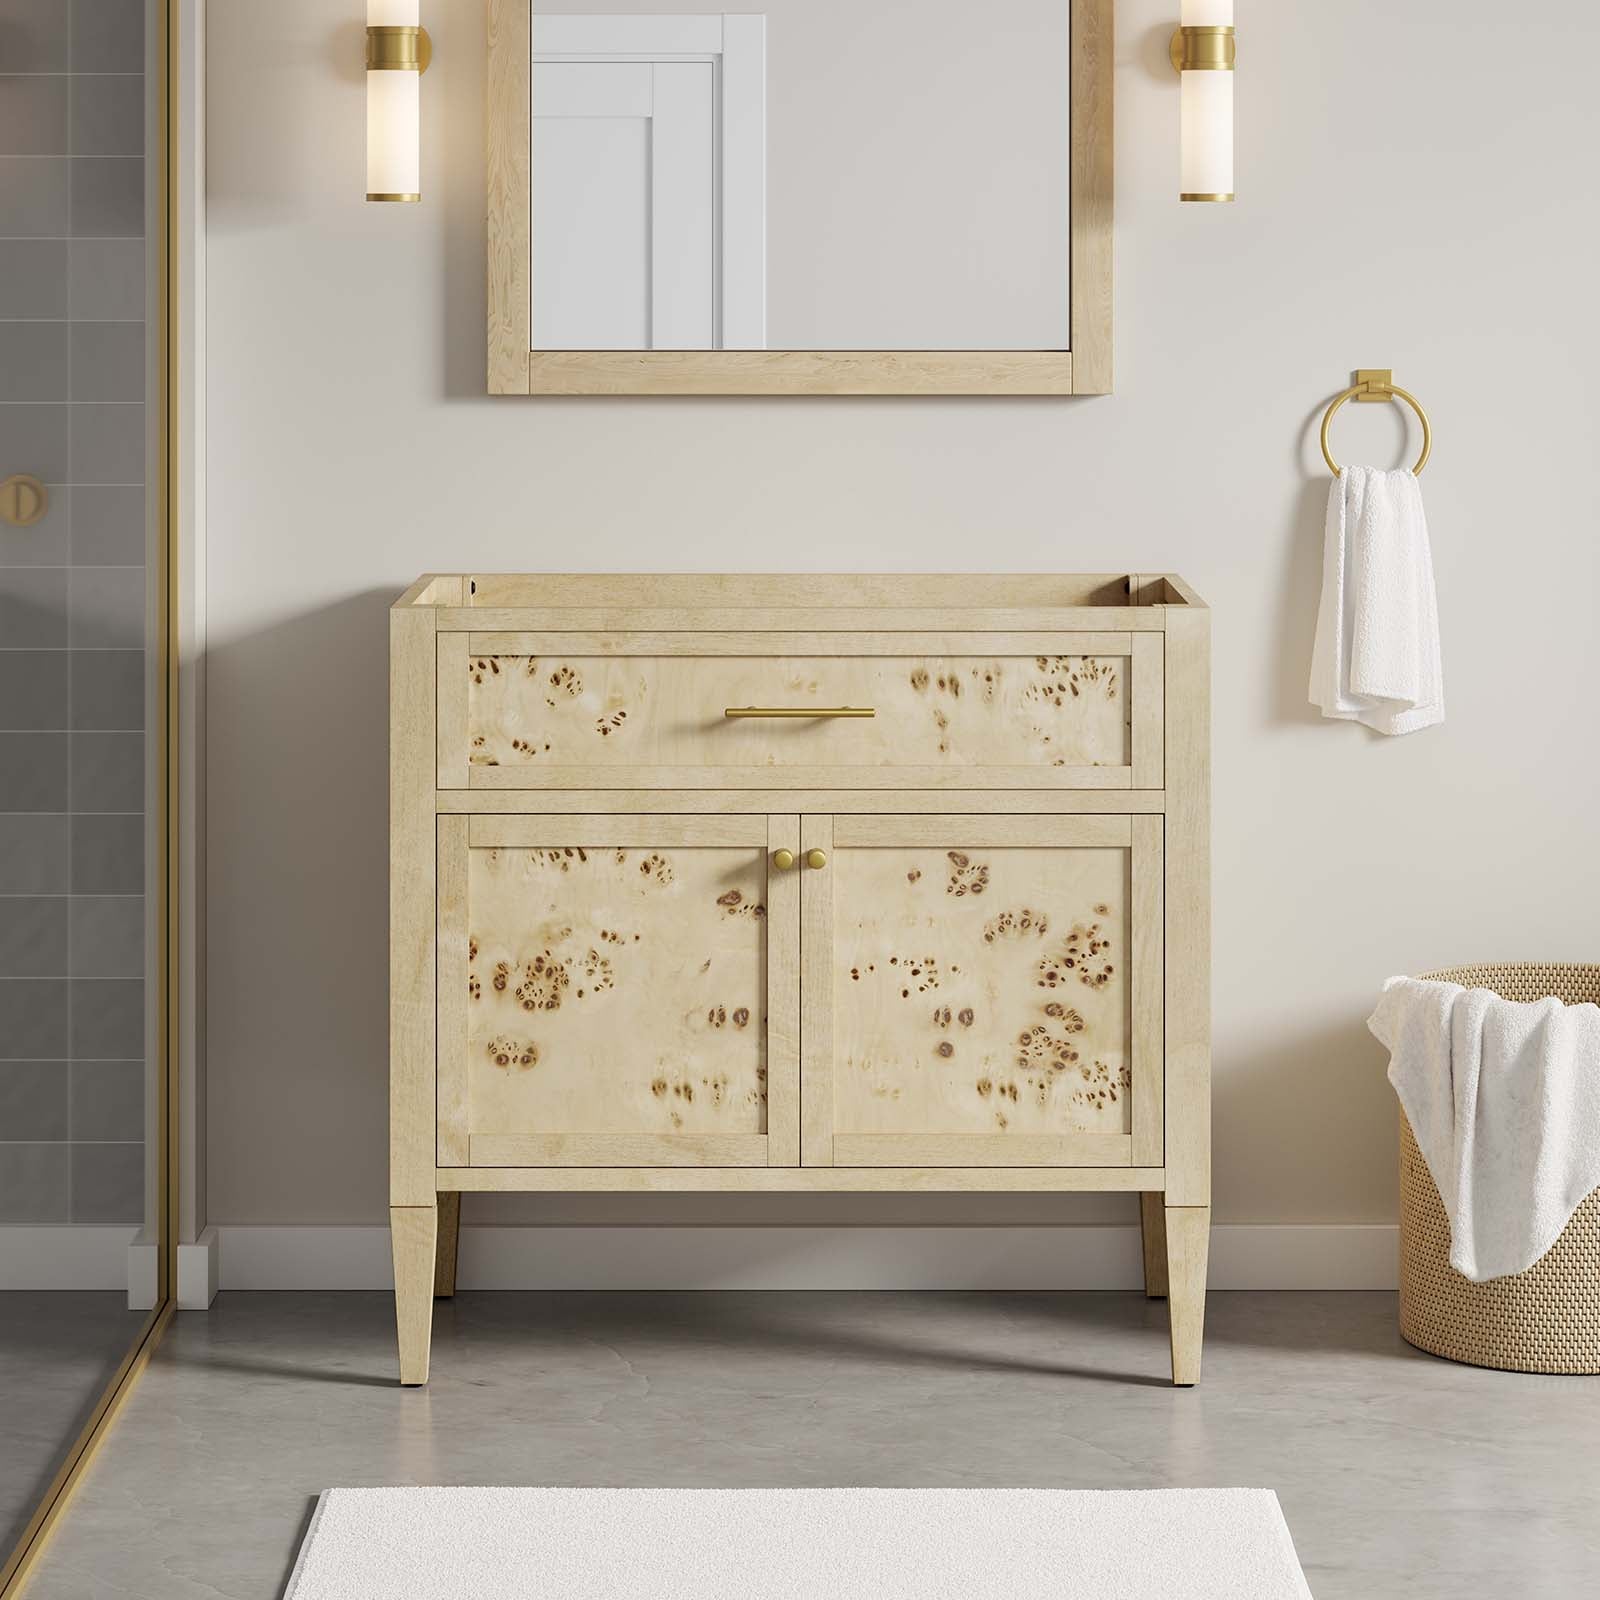 Elysian 36" Wood Bathroom Vanity Cabinet (Sink Basin Not Included) By Modway - EEI-6139 | Bathroom Accessories | Modway - 11